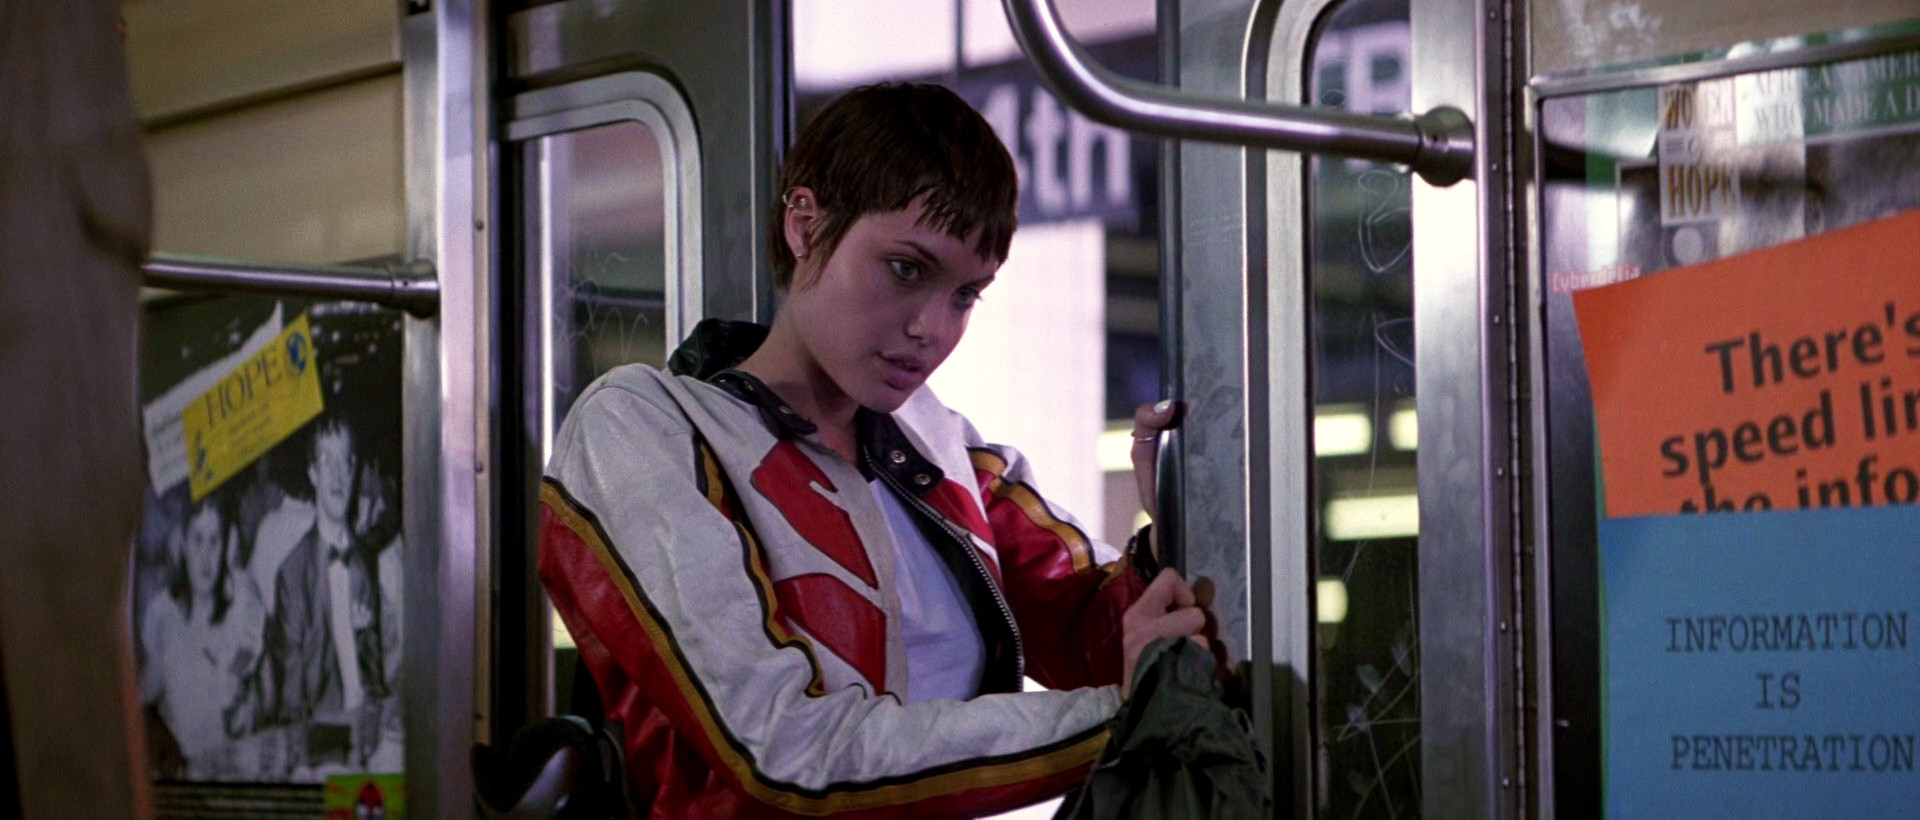 Scene from Hackers (1995) movie: character Kate Libby/Acid Burn played by Angelina Jolie, backpack in hand, standing in closing subway doors, holding them open, in leather Suzuki red and white motorcycle jacket, gazing/beckoning in the character Dade's direction. 'Are you coming?' she asks. Just out of the shot some pieces of orange and blue paper are taped to the subway wall with large printed text. The orange one says There's no speed limit on the information highway. The blue one: Information is penetration. A Cyberdelia sticker can be seen stuck behind the orange paper.